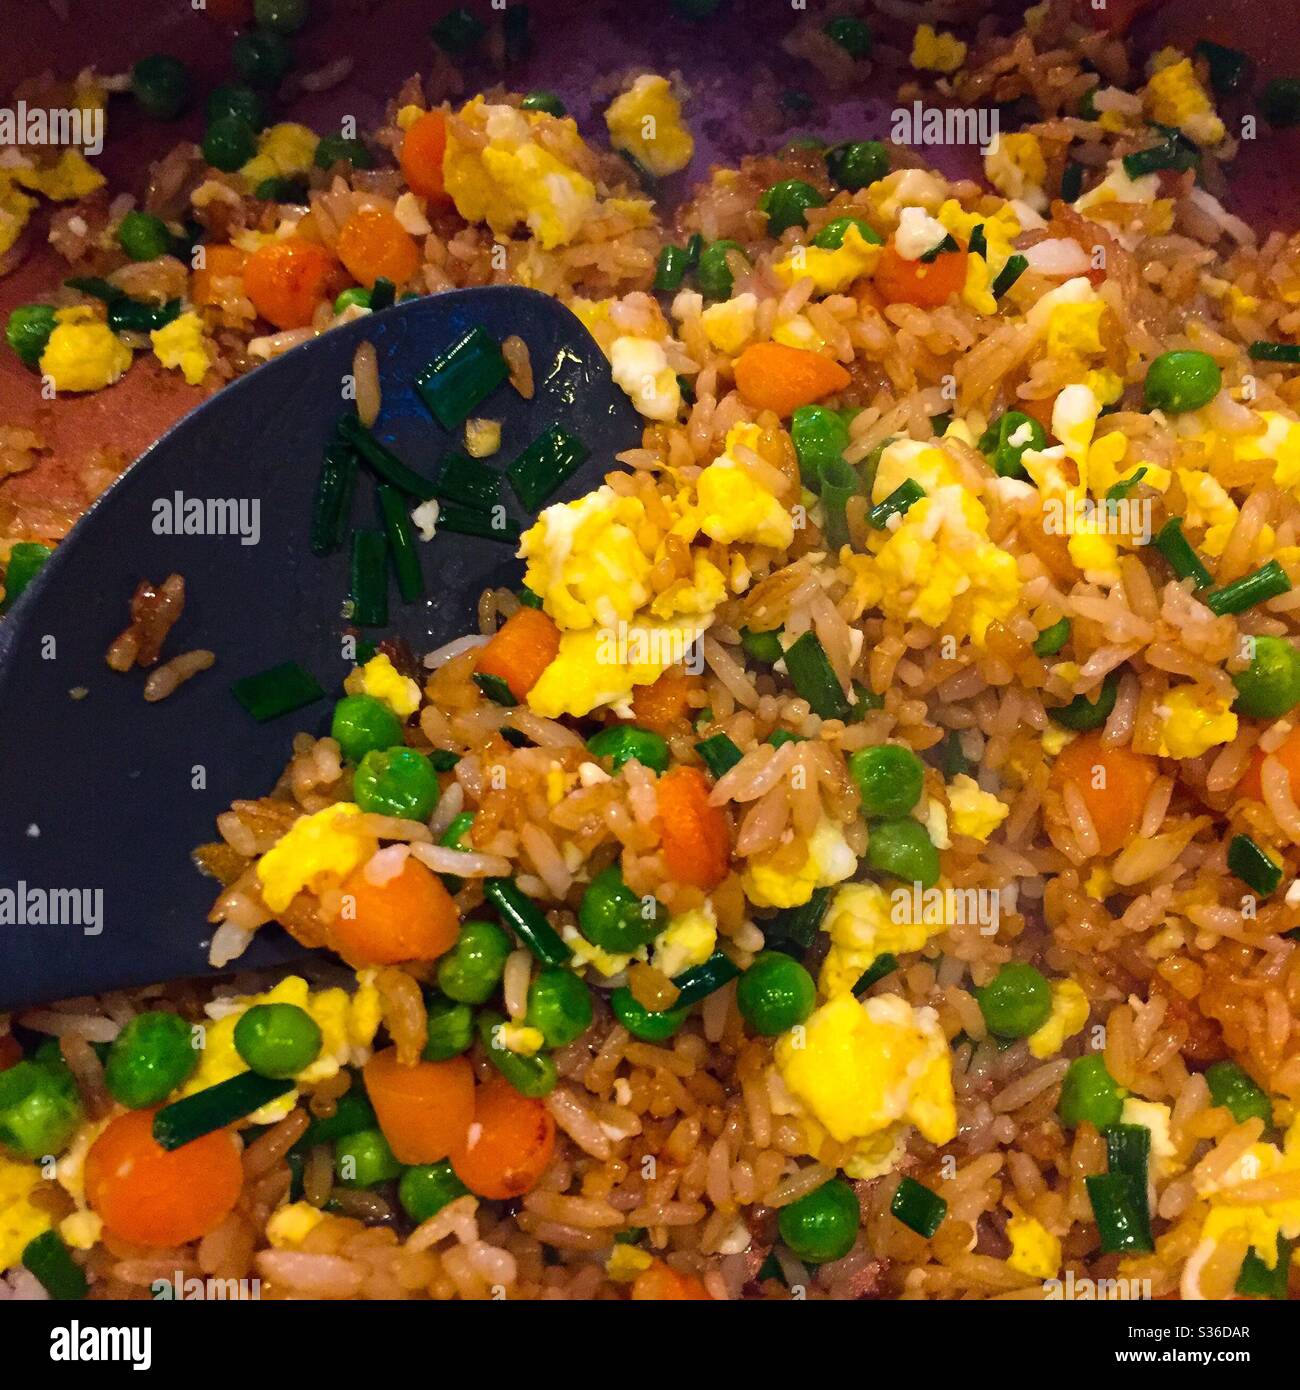 Making vegetable fried rice. Stock Photo